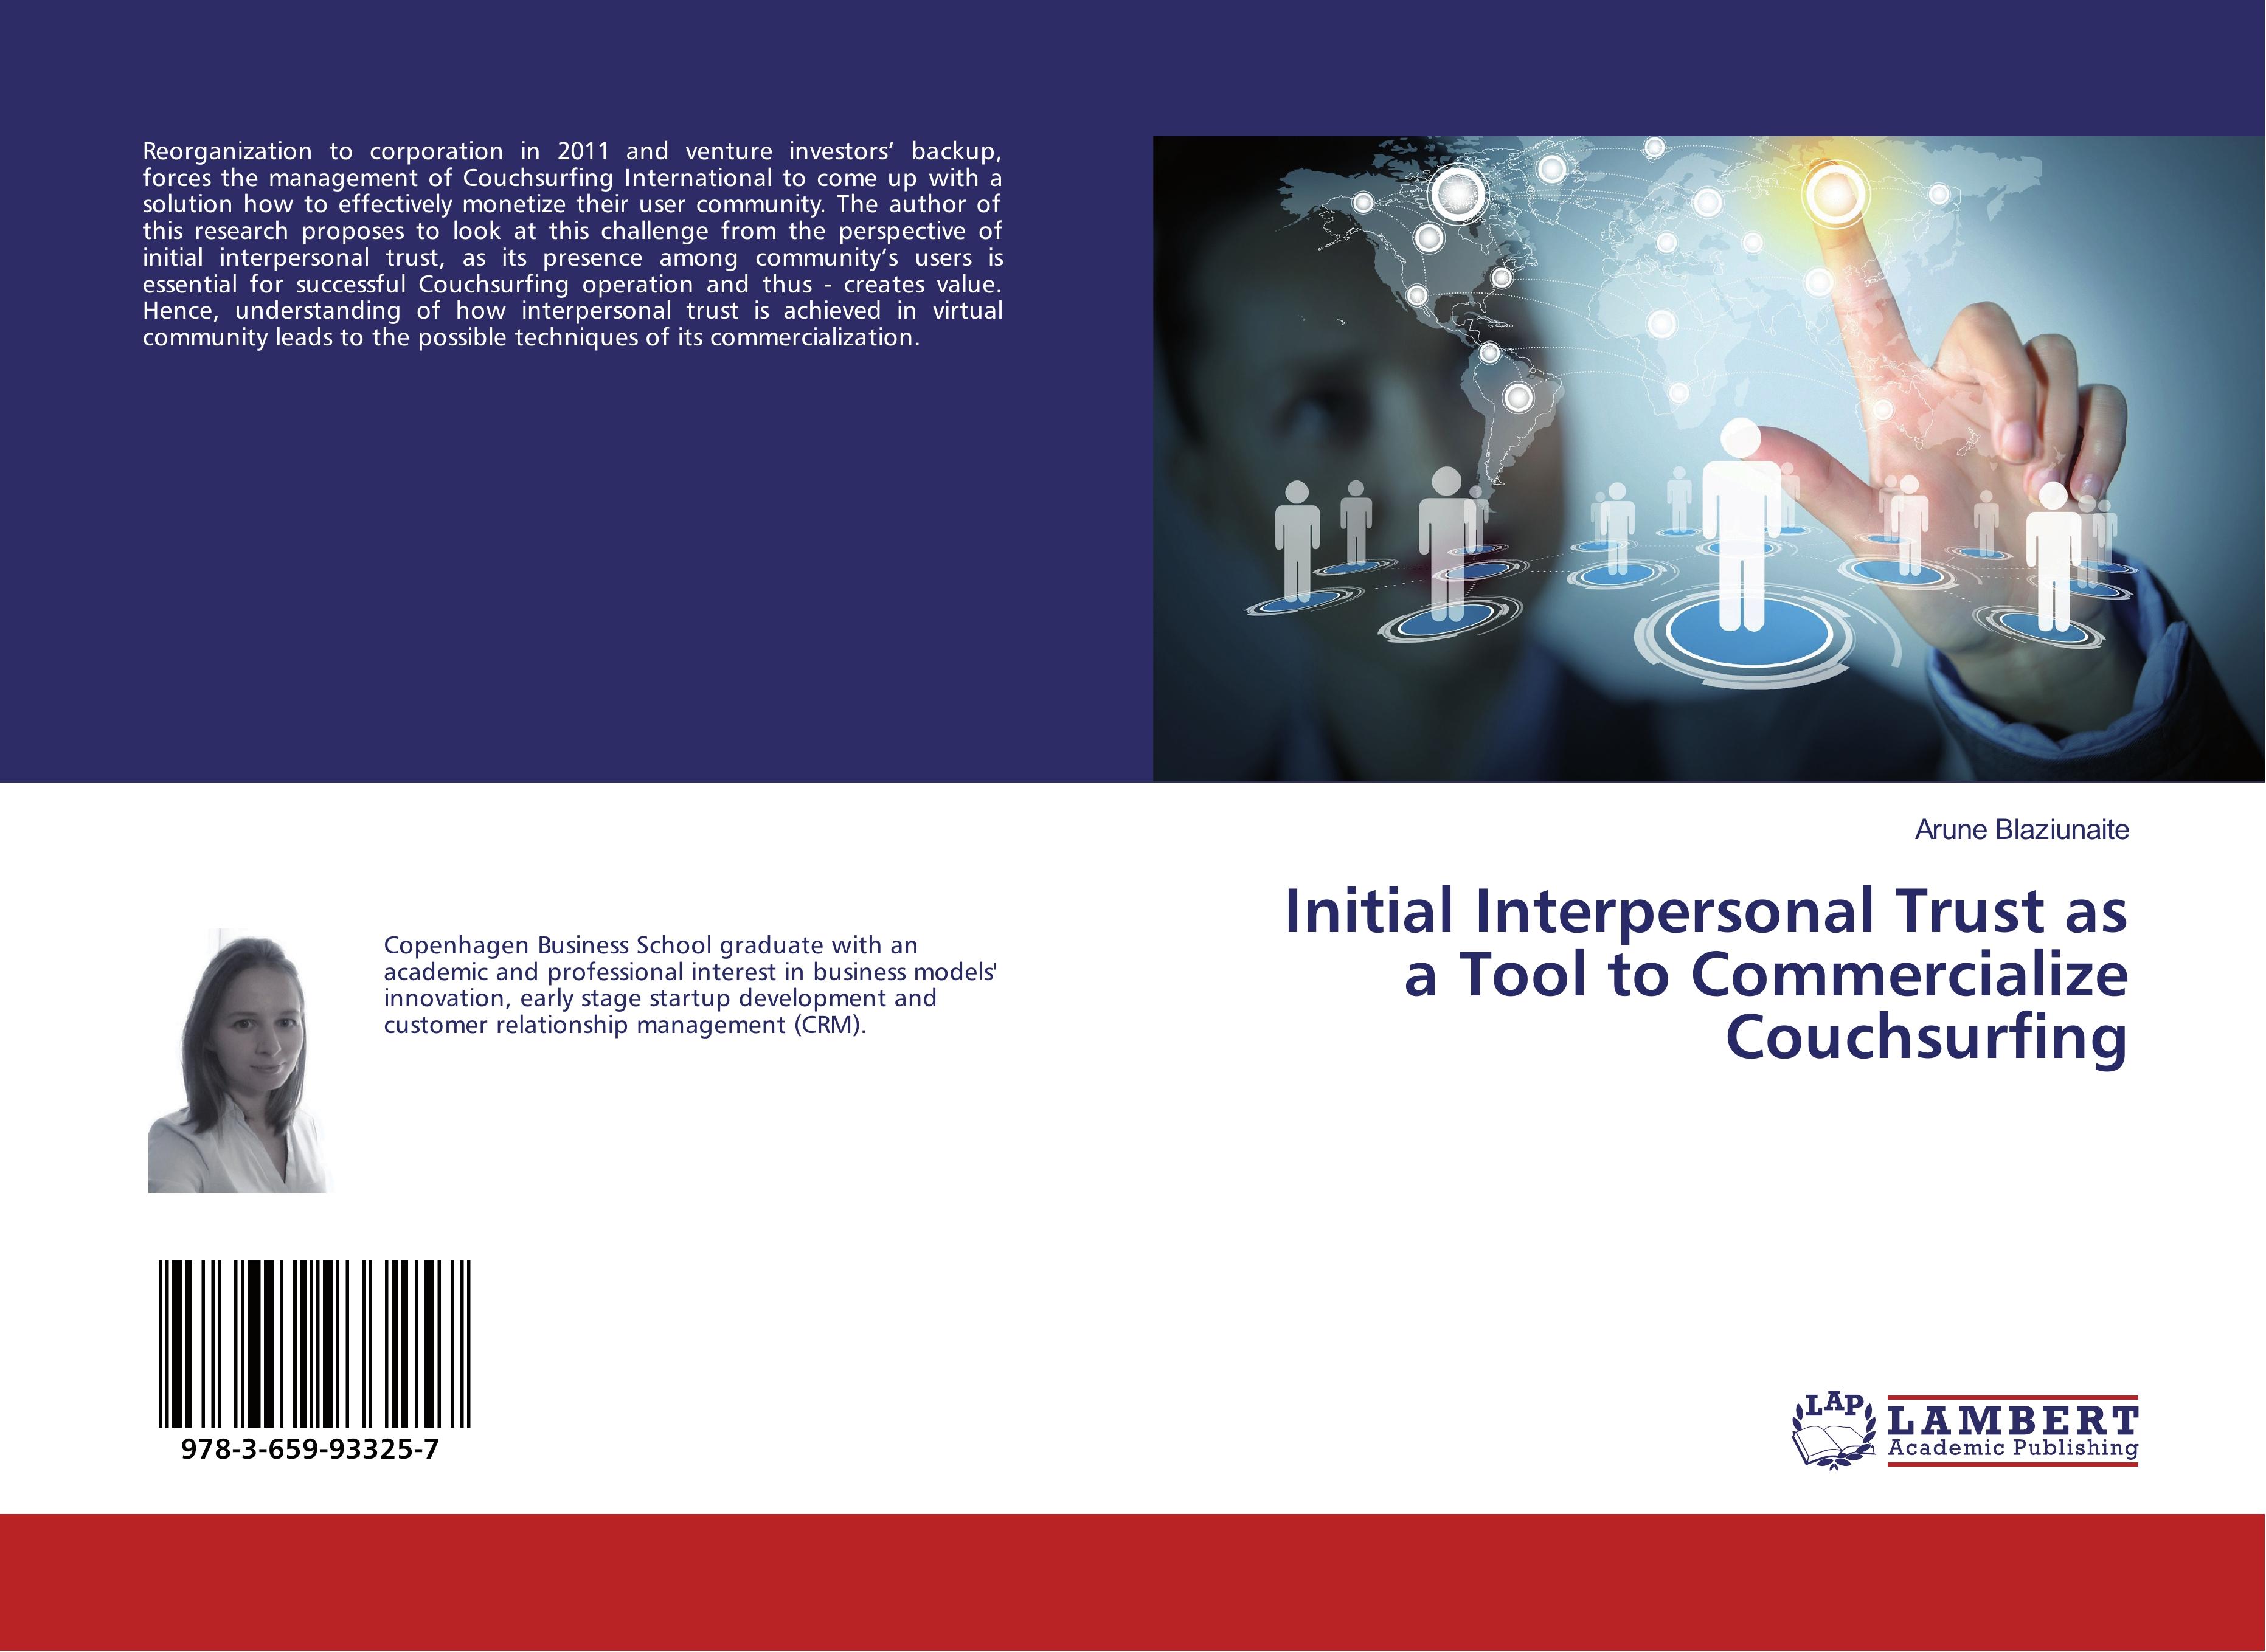 Initial Interpersonal Trust as a Tool to Commercialize Couchsurfing - Blaziunaite, Arune